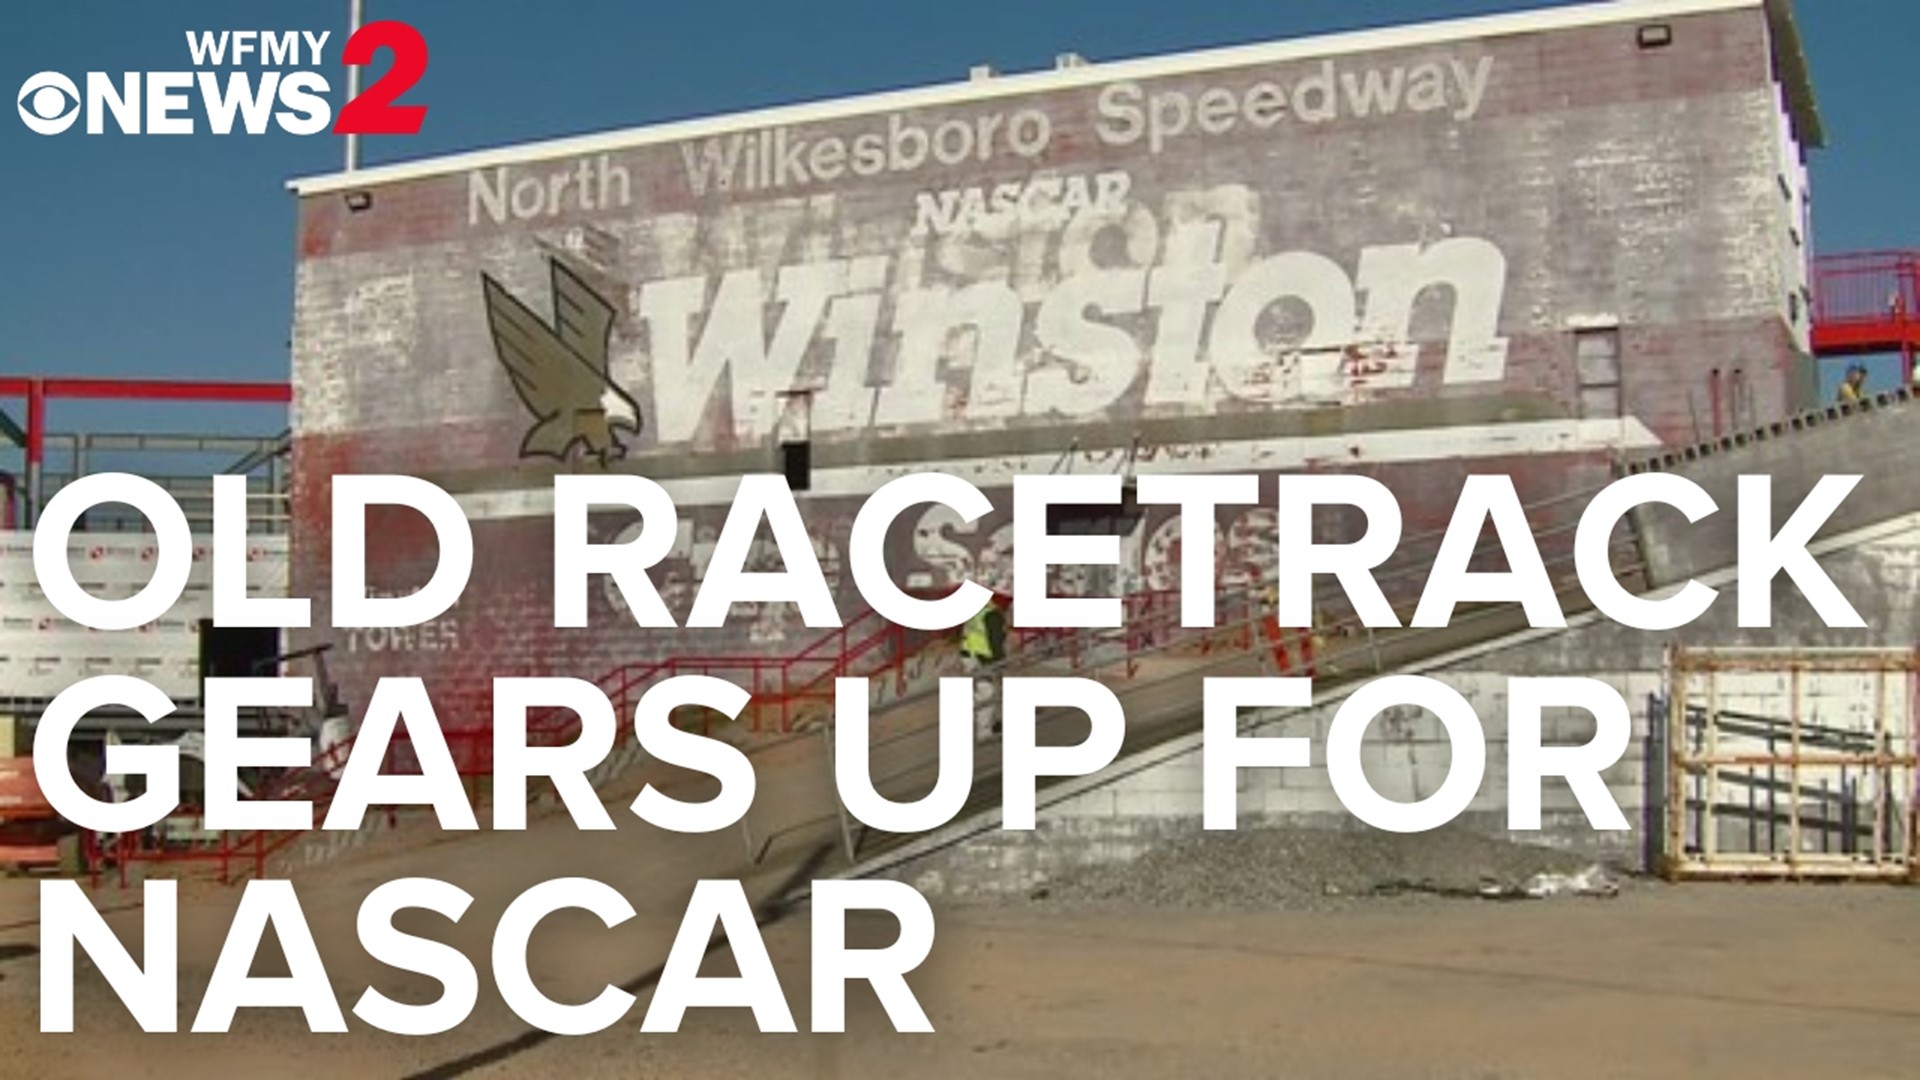 NASCAR comes back to the Speedway for the first time in almost three decades May 19-21.